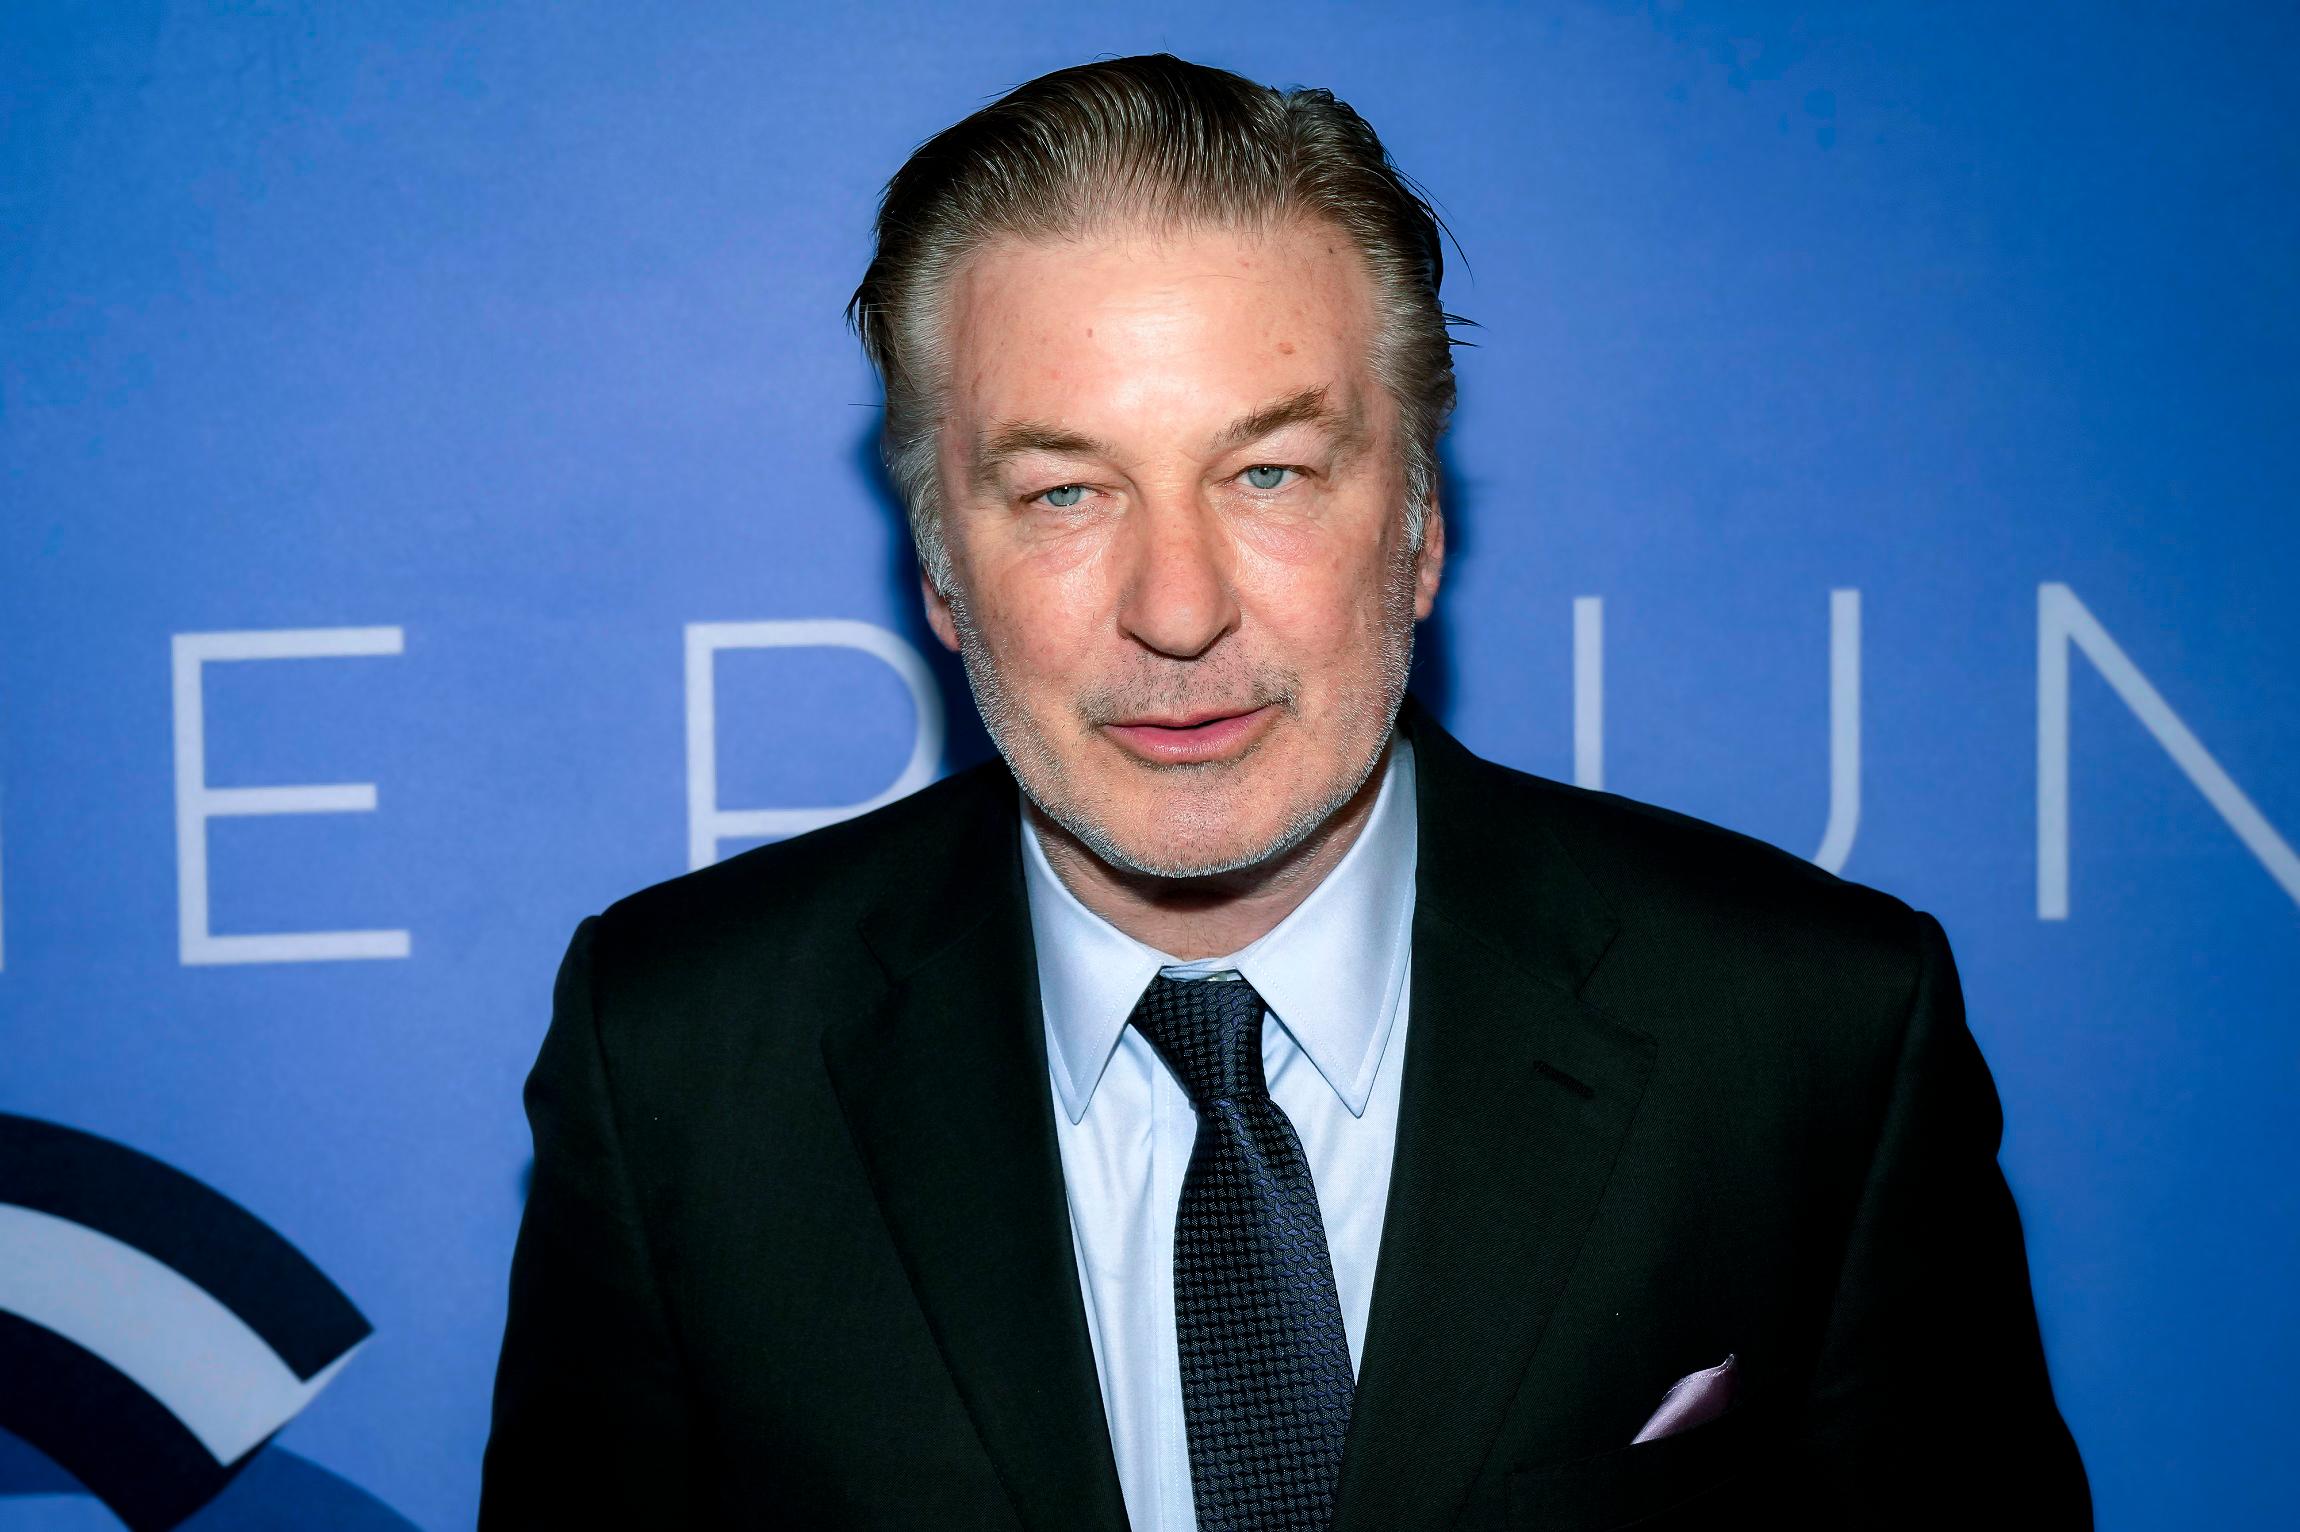 Judge Denies Alec Baldwin Motion to Dismiss Manslaughter Charge in ‘Rust’ Shooting